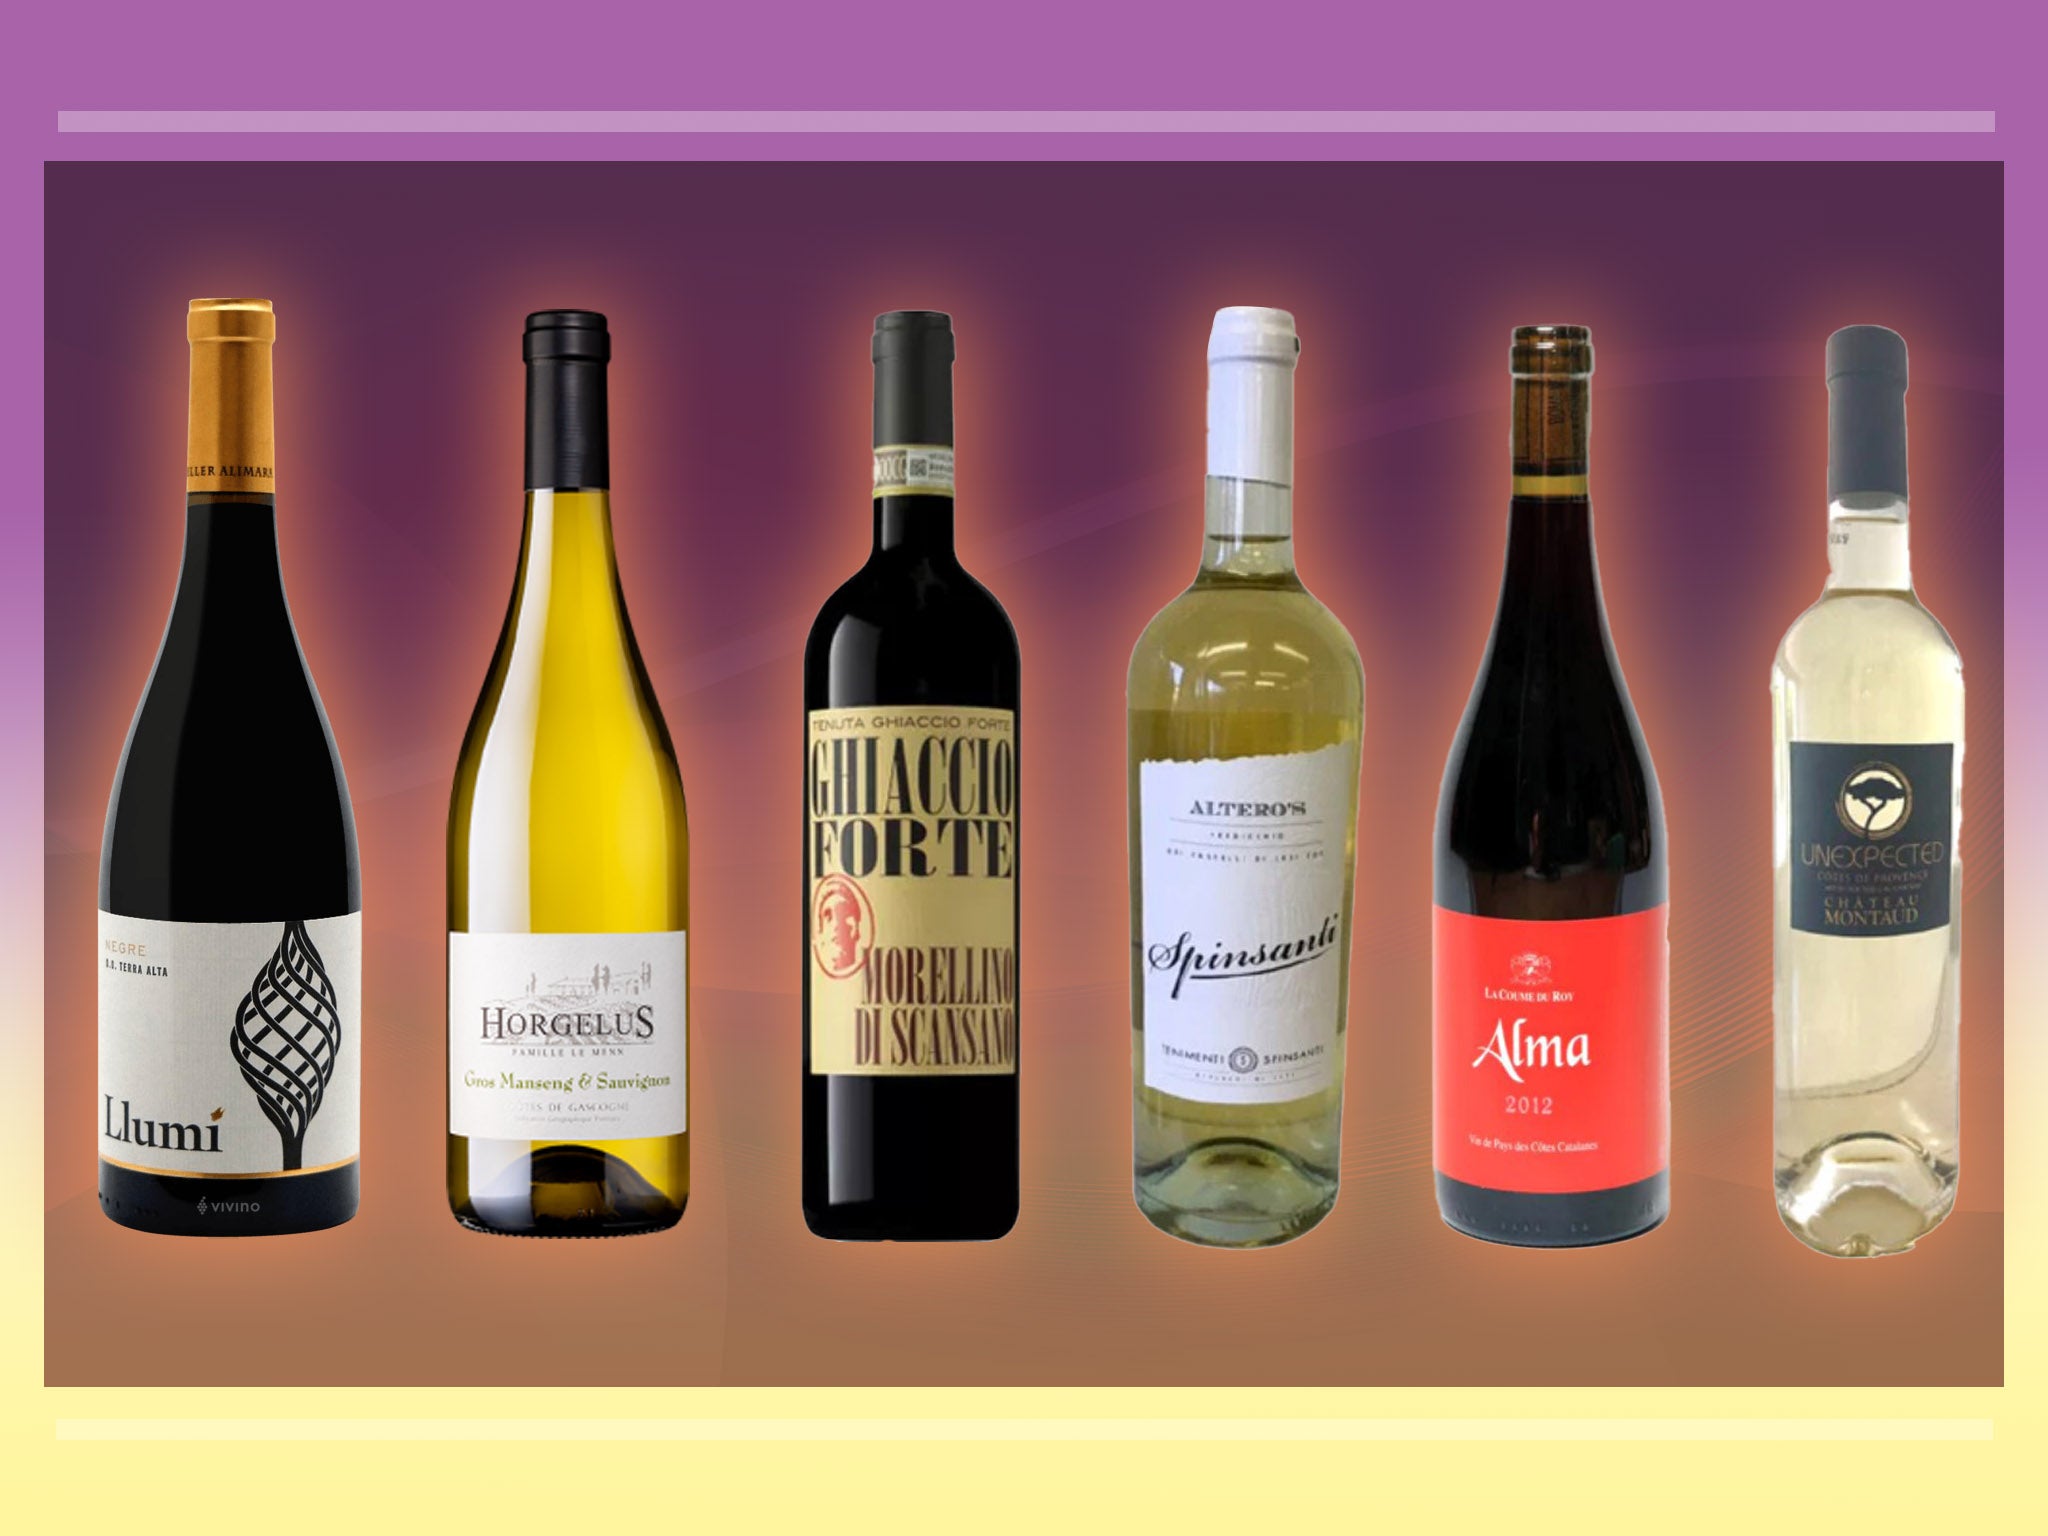 Honest Grapes’ curated collection of wines will take you on a journey around the Mediterranean